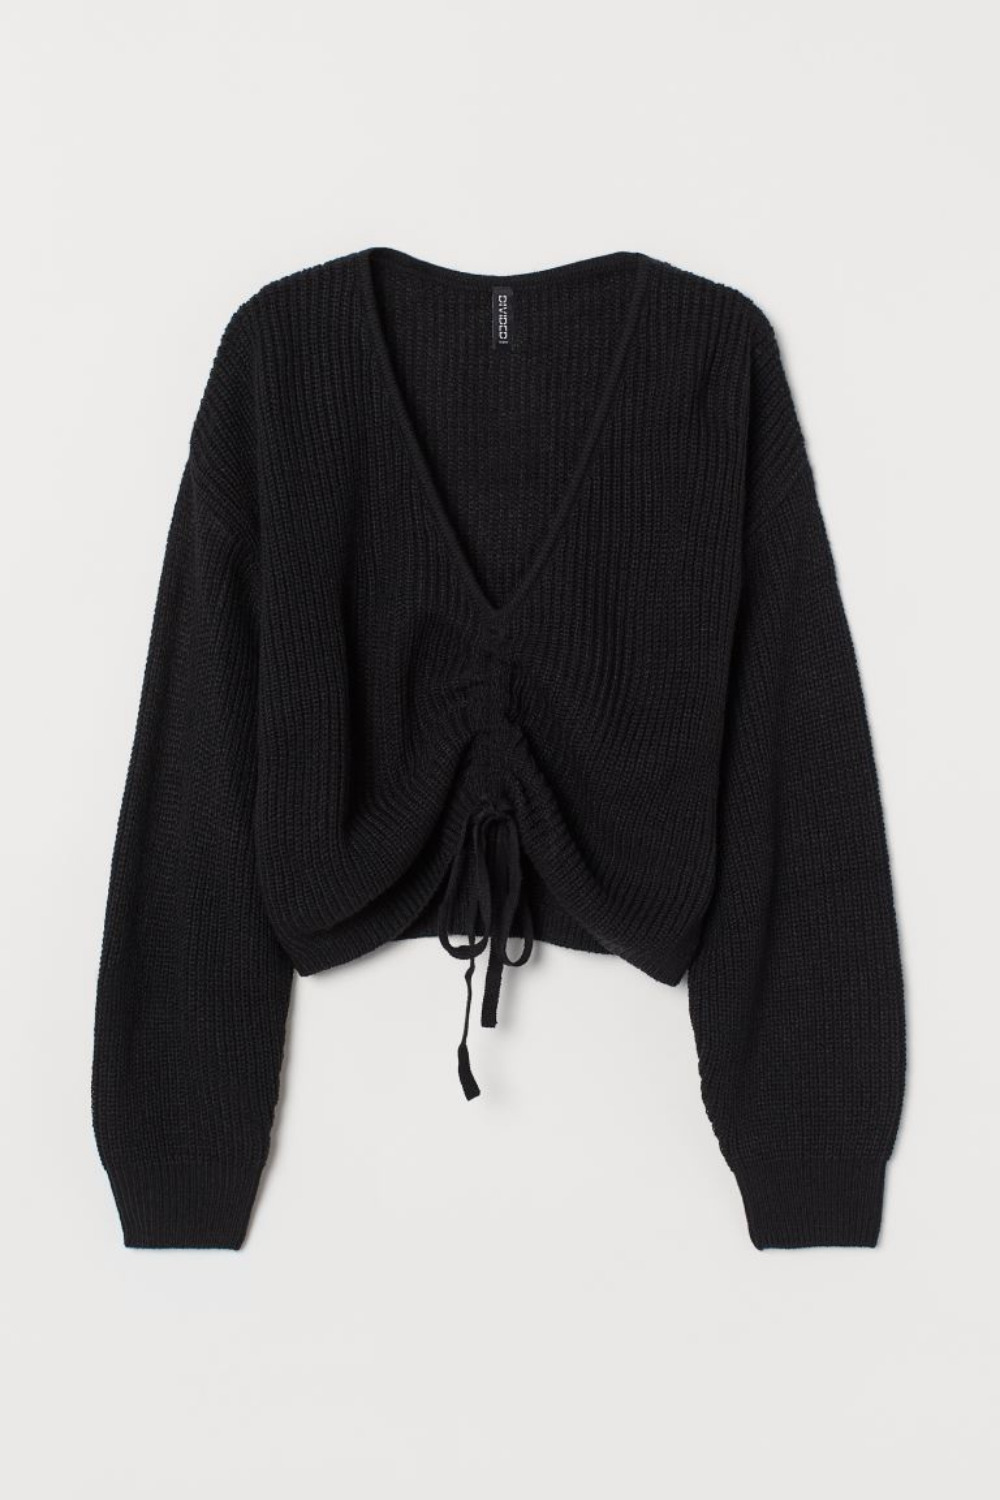 WEEKLY FINDS + H&M Knit Sweater